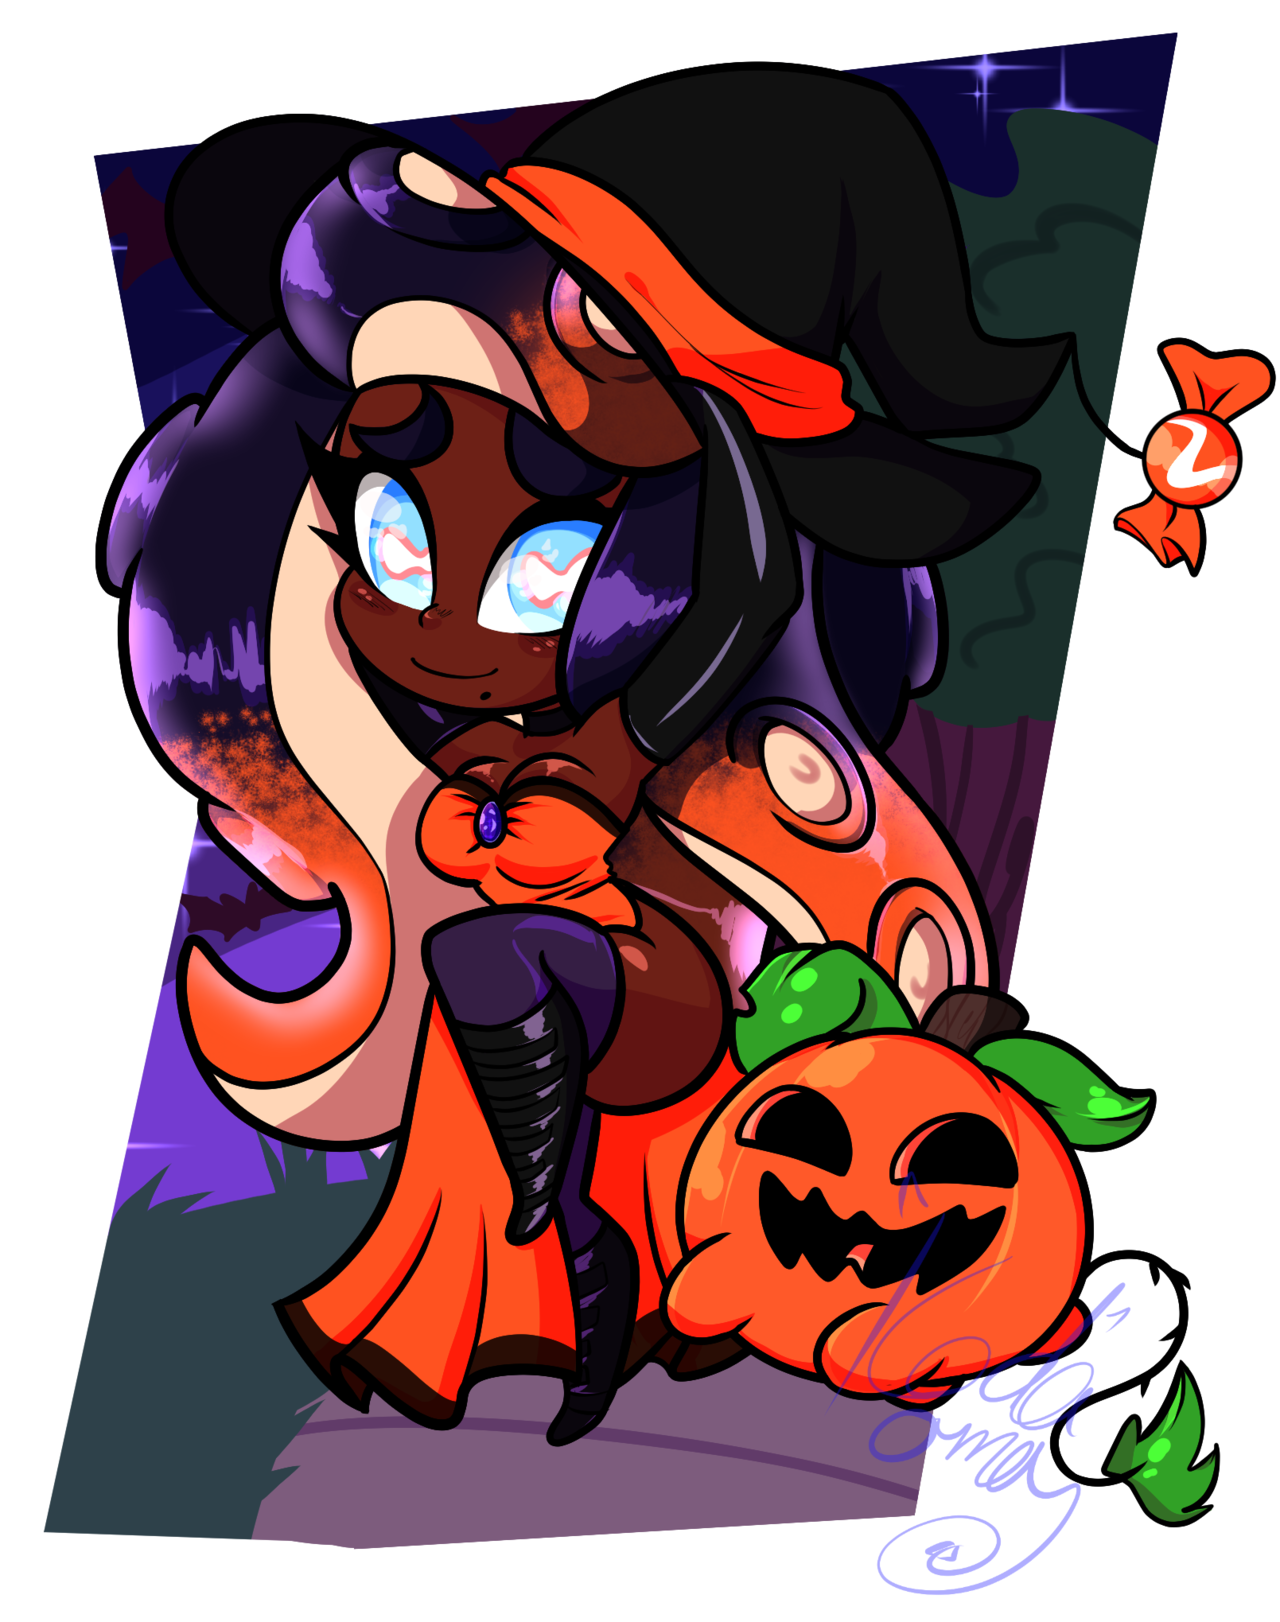 kodaoma:Witch Marina with her little puppy such a cutie! &lt;3